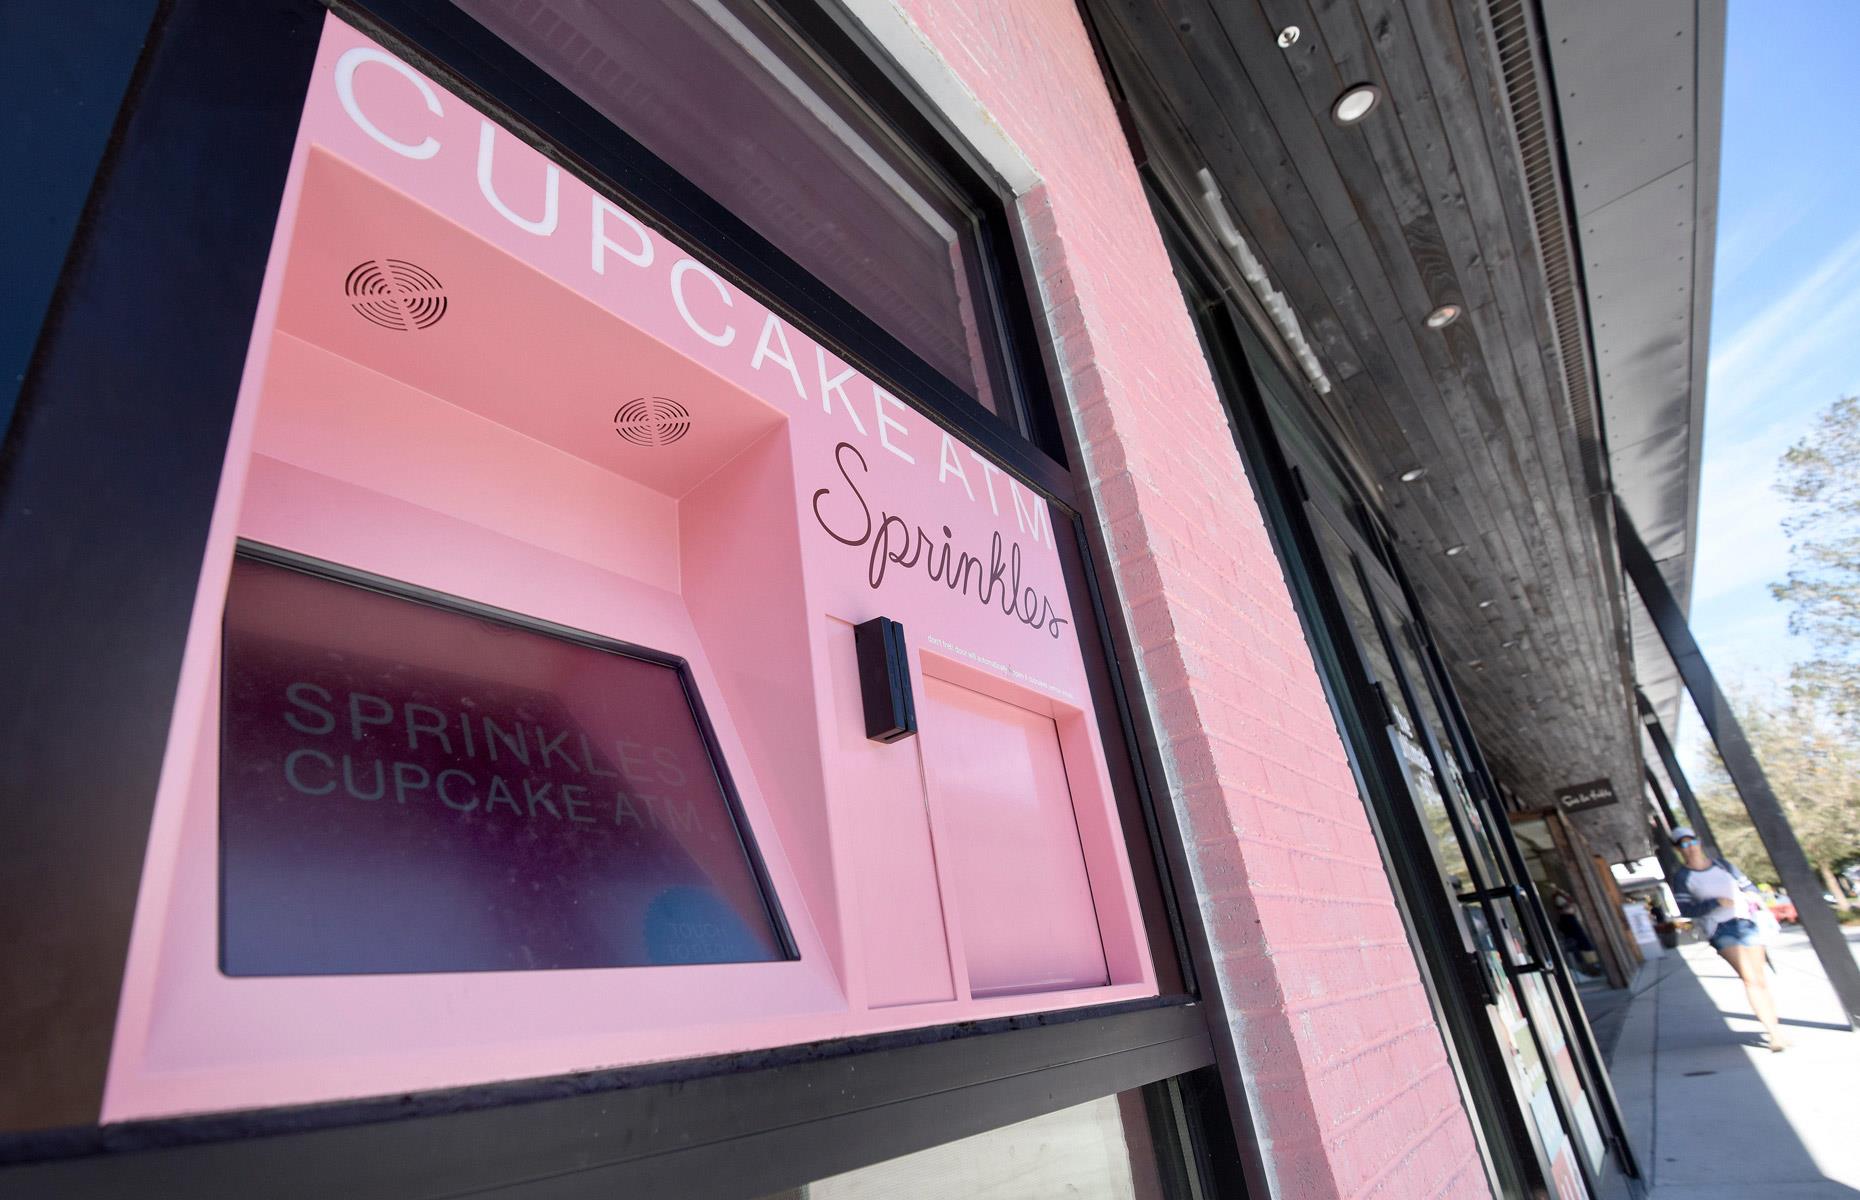 <p>There is plenty to discover in Hyde Park village, but the cupcake ATM was a real highlight for us. Yes, you read that correctly. <a href="https://sprinkles.com/pages/location-tampa">Sprinkles Cupcakes</a> knows that, sometimes, you just need 24-hour access to cake. This candy-pink machine supplies a range of cupcakes, gluten-free options included, all packed in a pretty box for you to take away.</p>